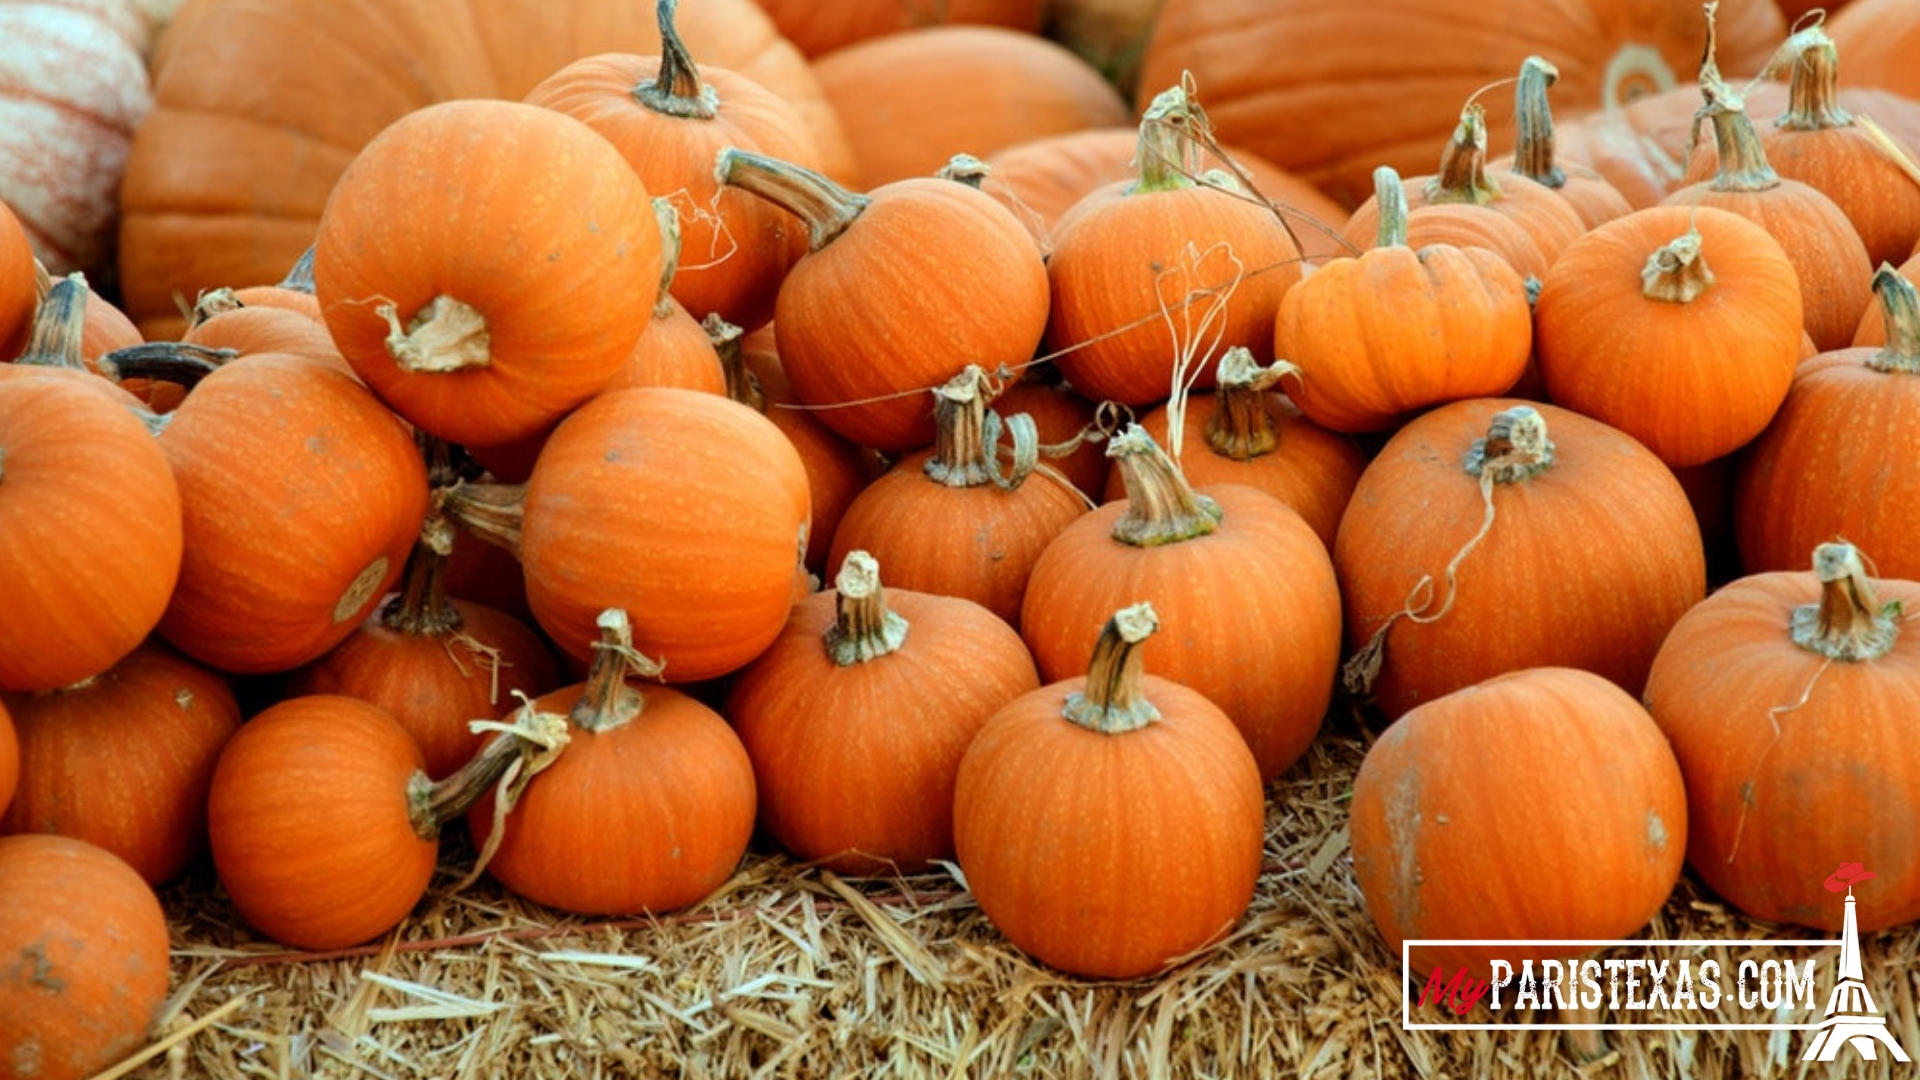 Pumpkin Patch Opening Day and Farmers Market || Lee's Christmas Tree Farm - MyParisTexas